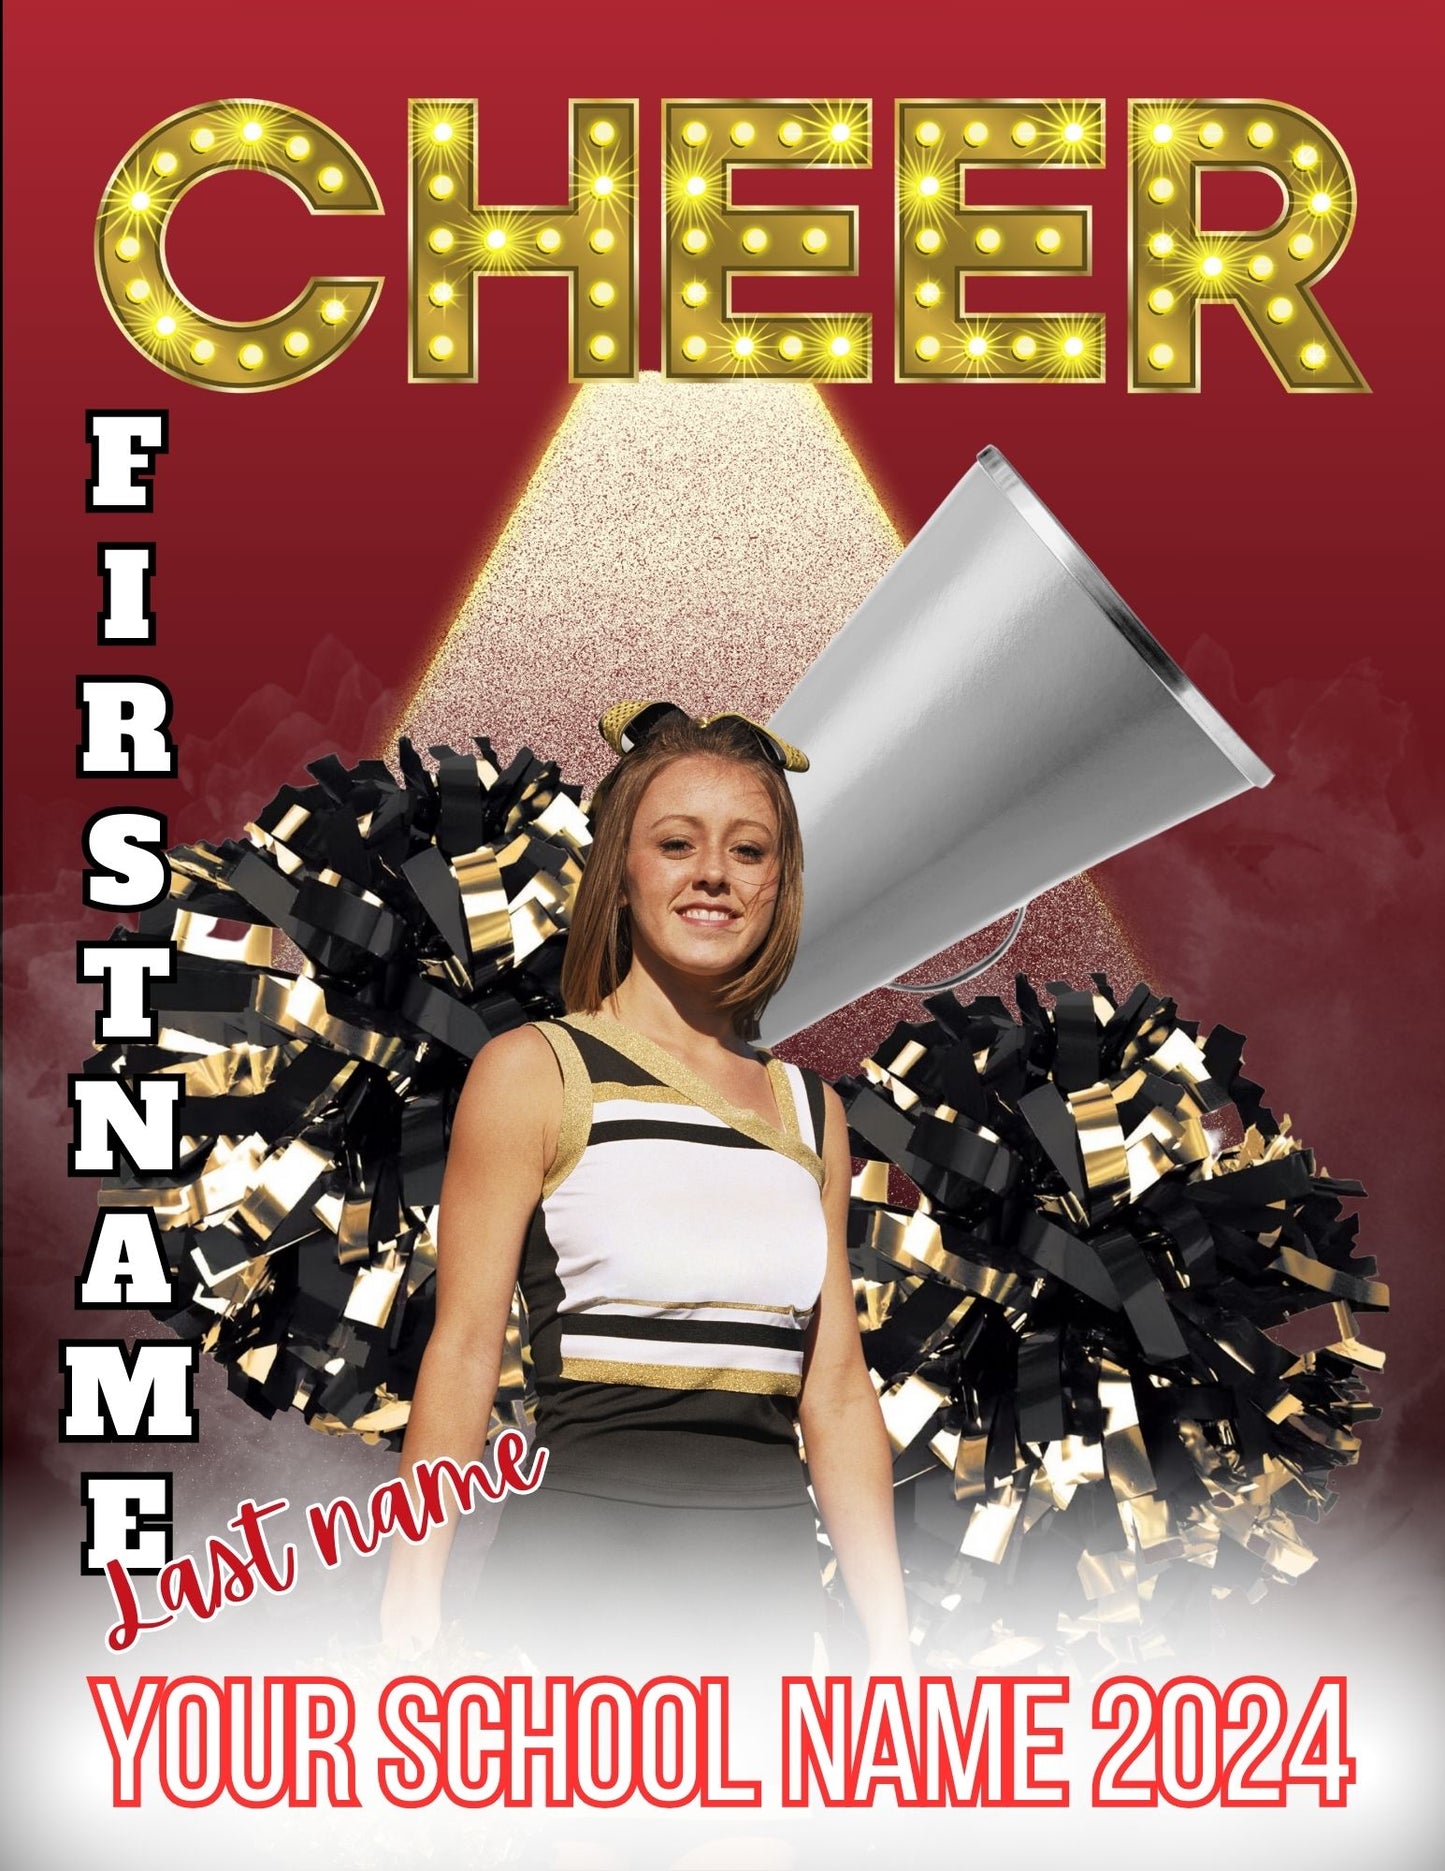 Cheer Player Trading Card Templates Bundle